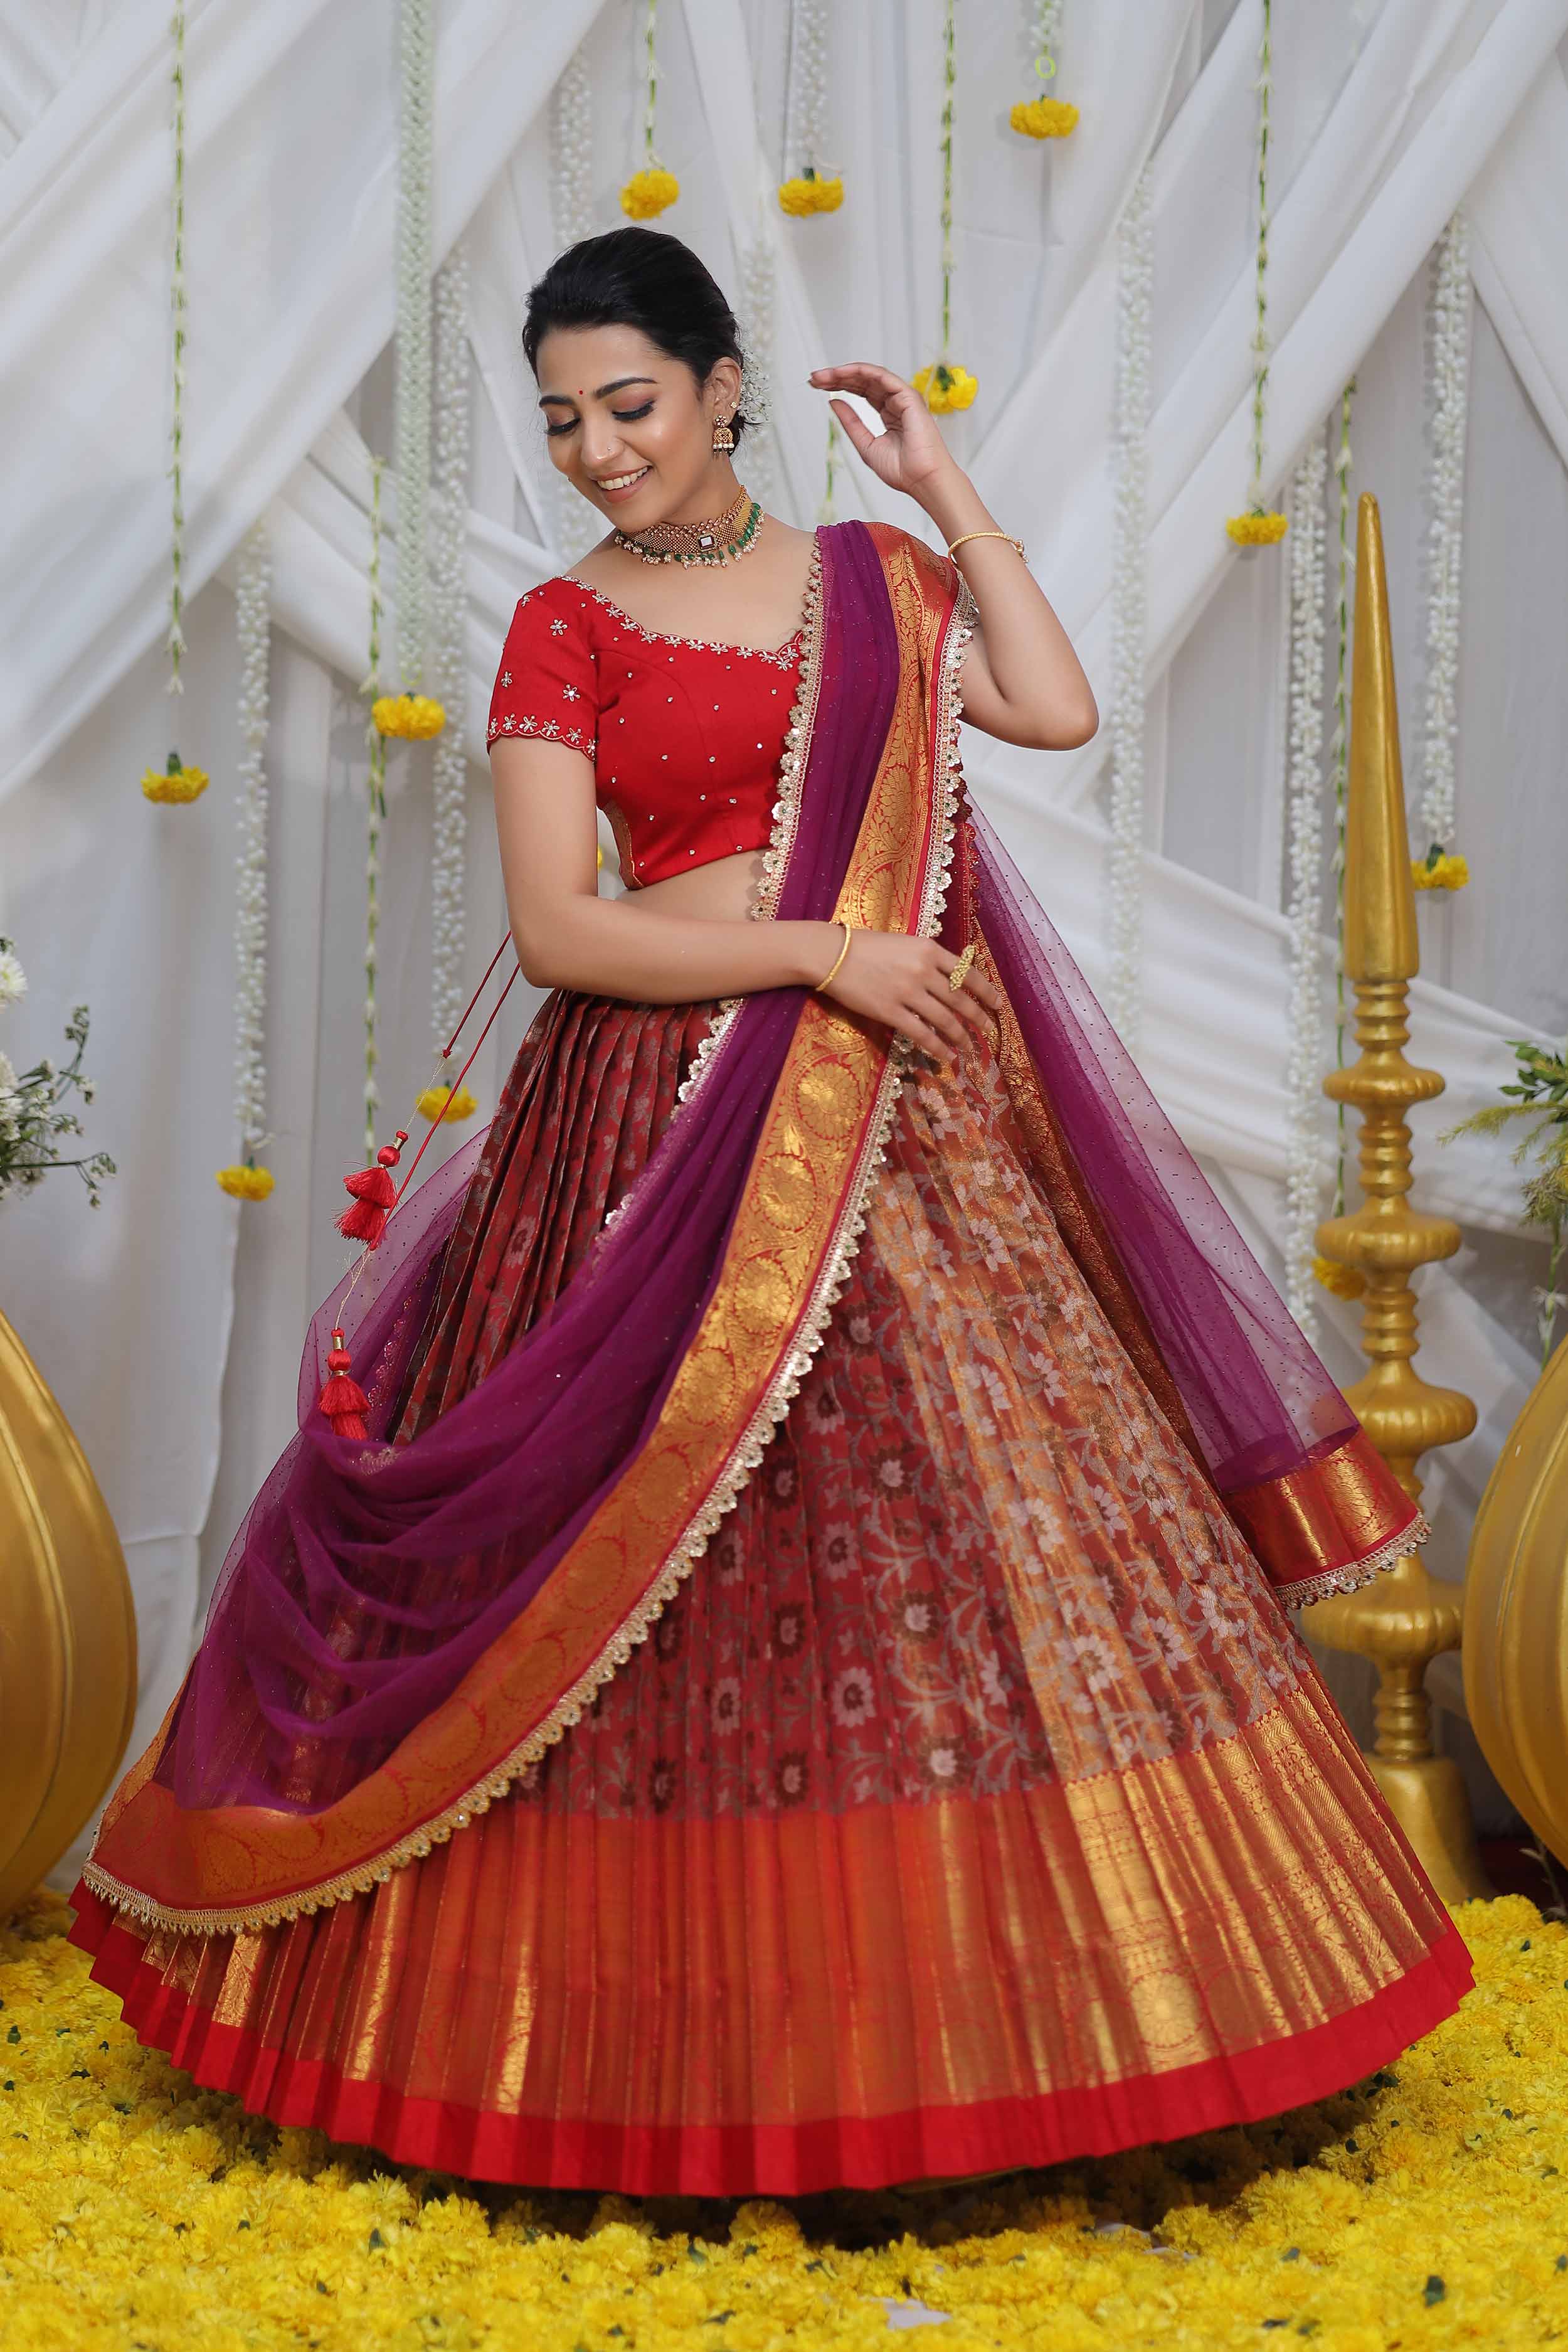 A woman in Red Lehenga suit